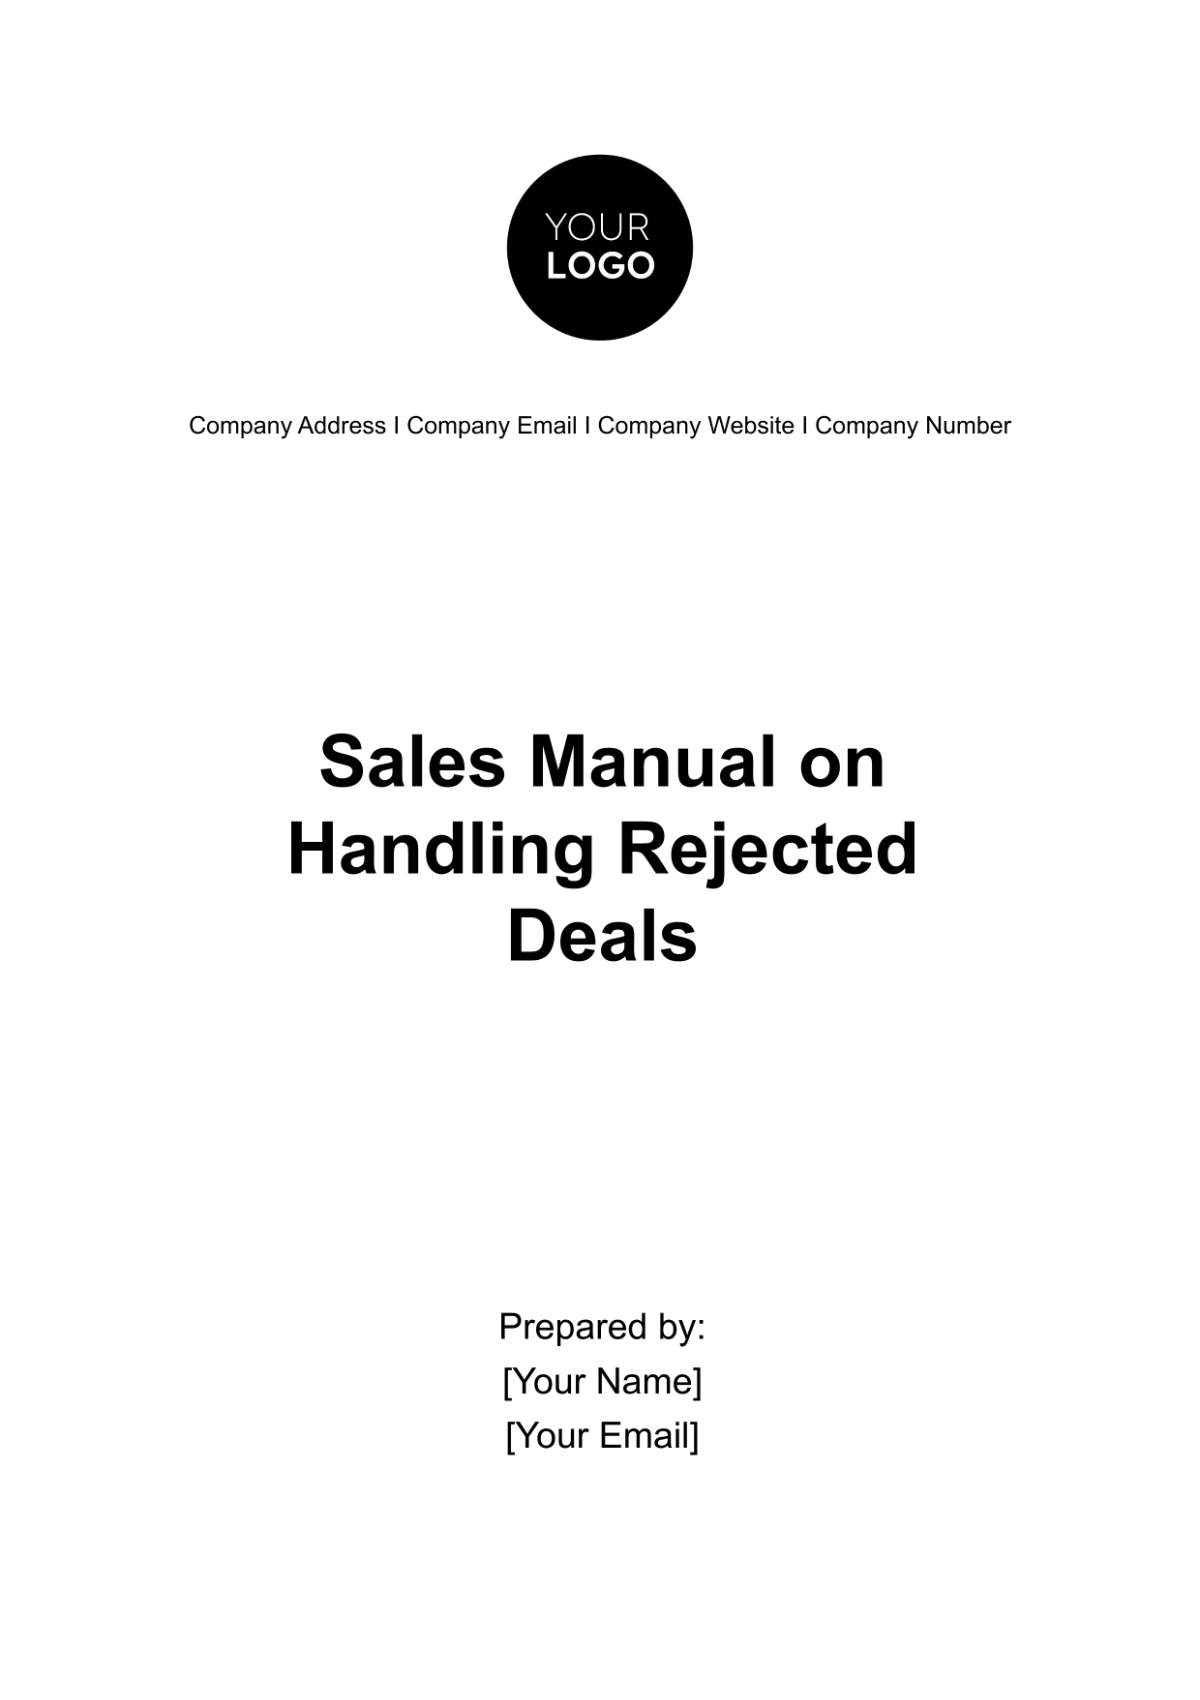 Free Sales Manual on Handling Rejected Deals Template